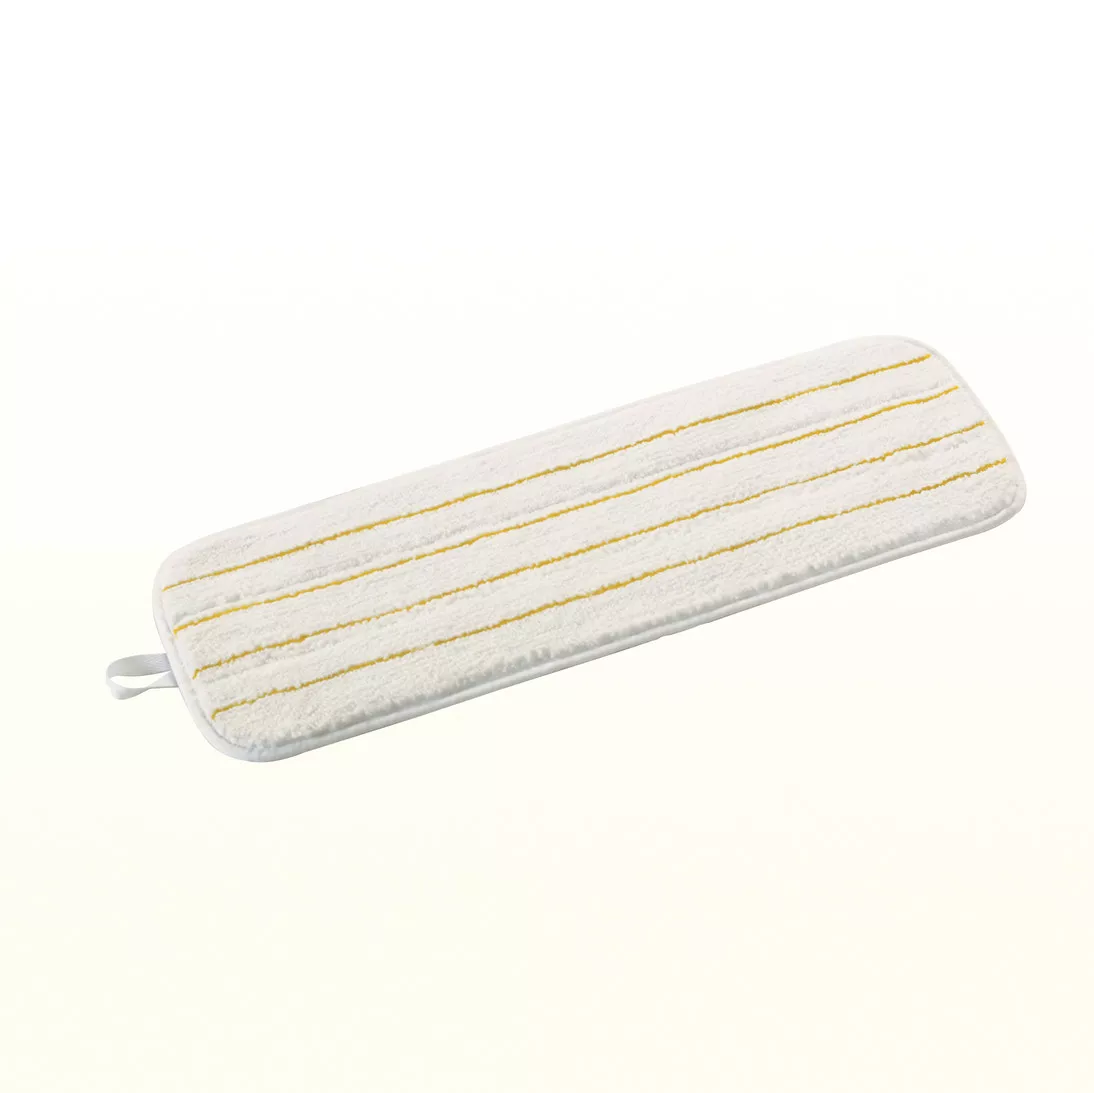 3M™ Easy Shine Applicator Pad, White With Yellow Stripes, 18 in, 10/Case